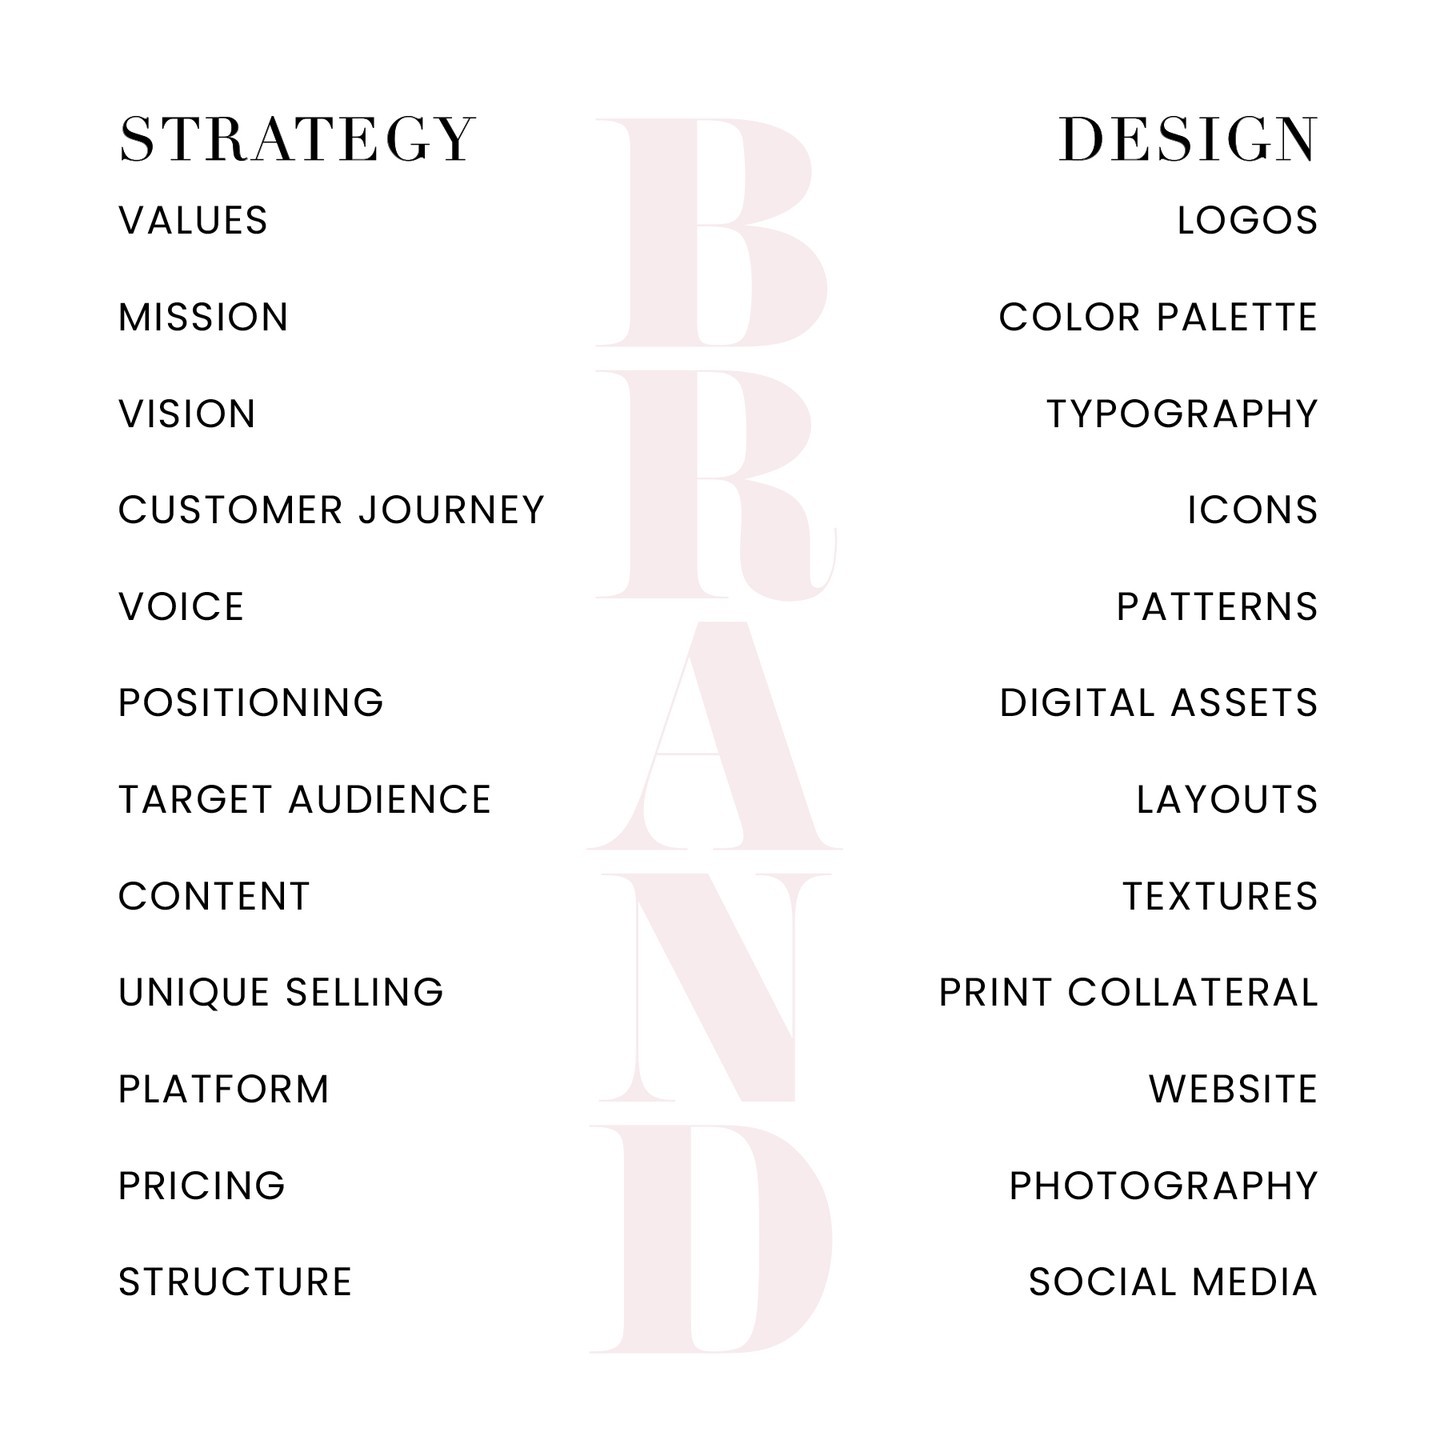 You can't have one without the other.

Want to alleviate the headaches and overwhelm? 

Clarify your STRATEGY for clarity in DESIGN.

🖤 Let's do it!

#branddesign #brandstrategy #brandstrategist #brandagency #brandingagency #targetaudience #branddesigner #graphicdesigner #creativeagency #welovebranding #welovedesign #marketingkc #kansascity